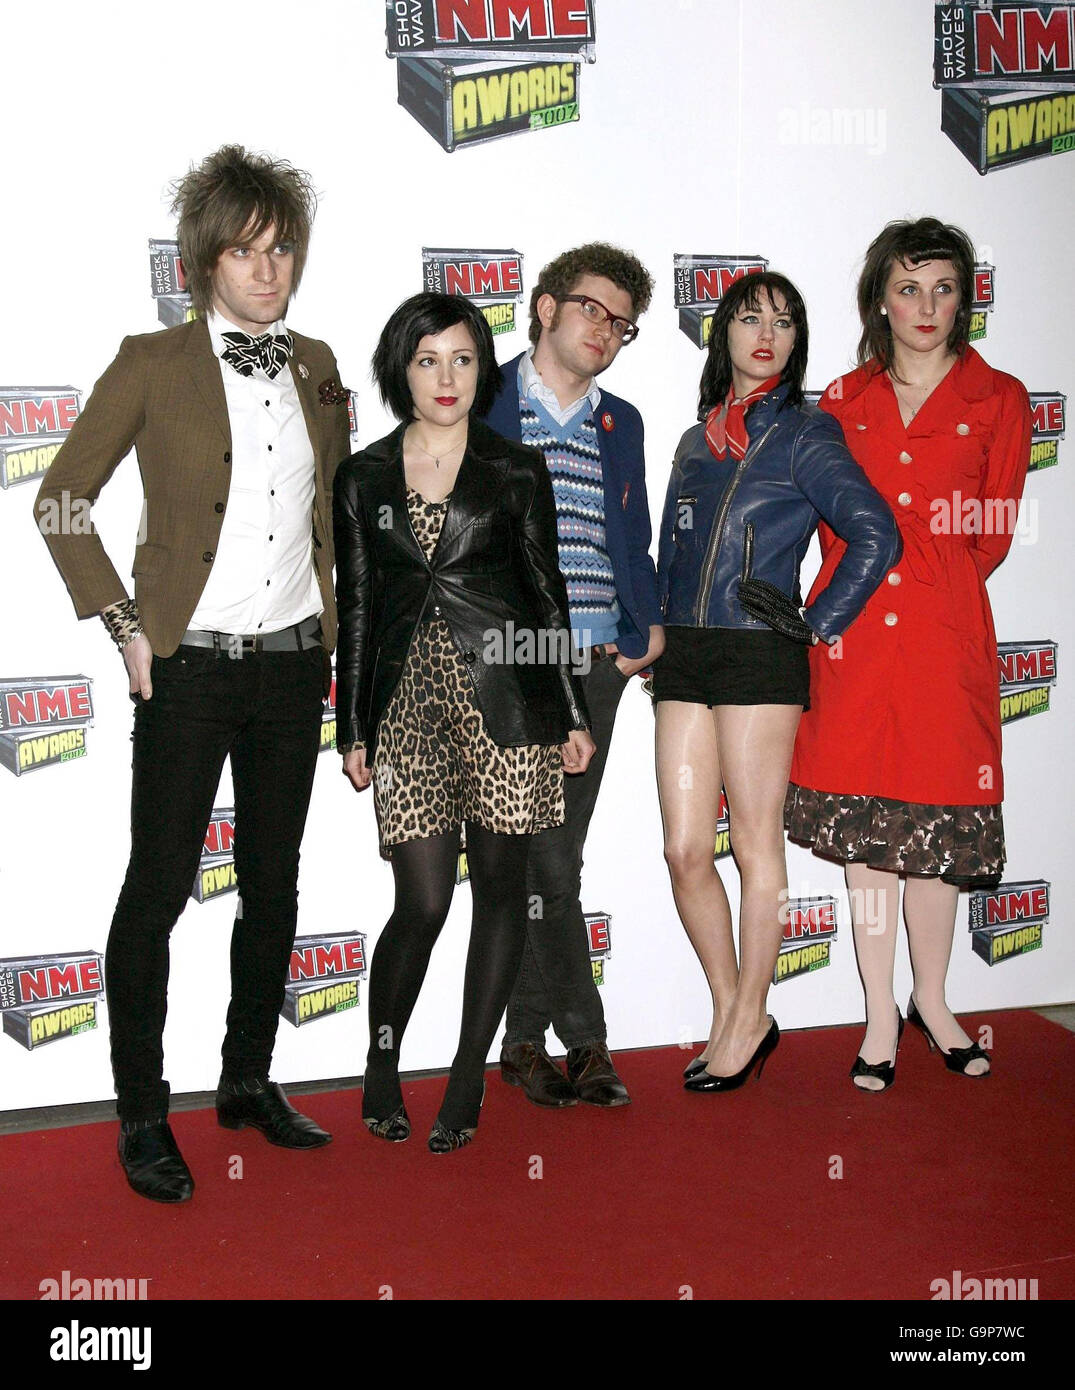 The Long Blondes arrive for the NME Awards 2007 at the Hammersmith Palais in west London. Stock Photo